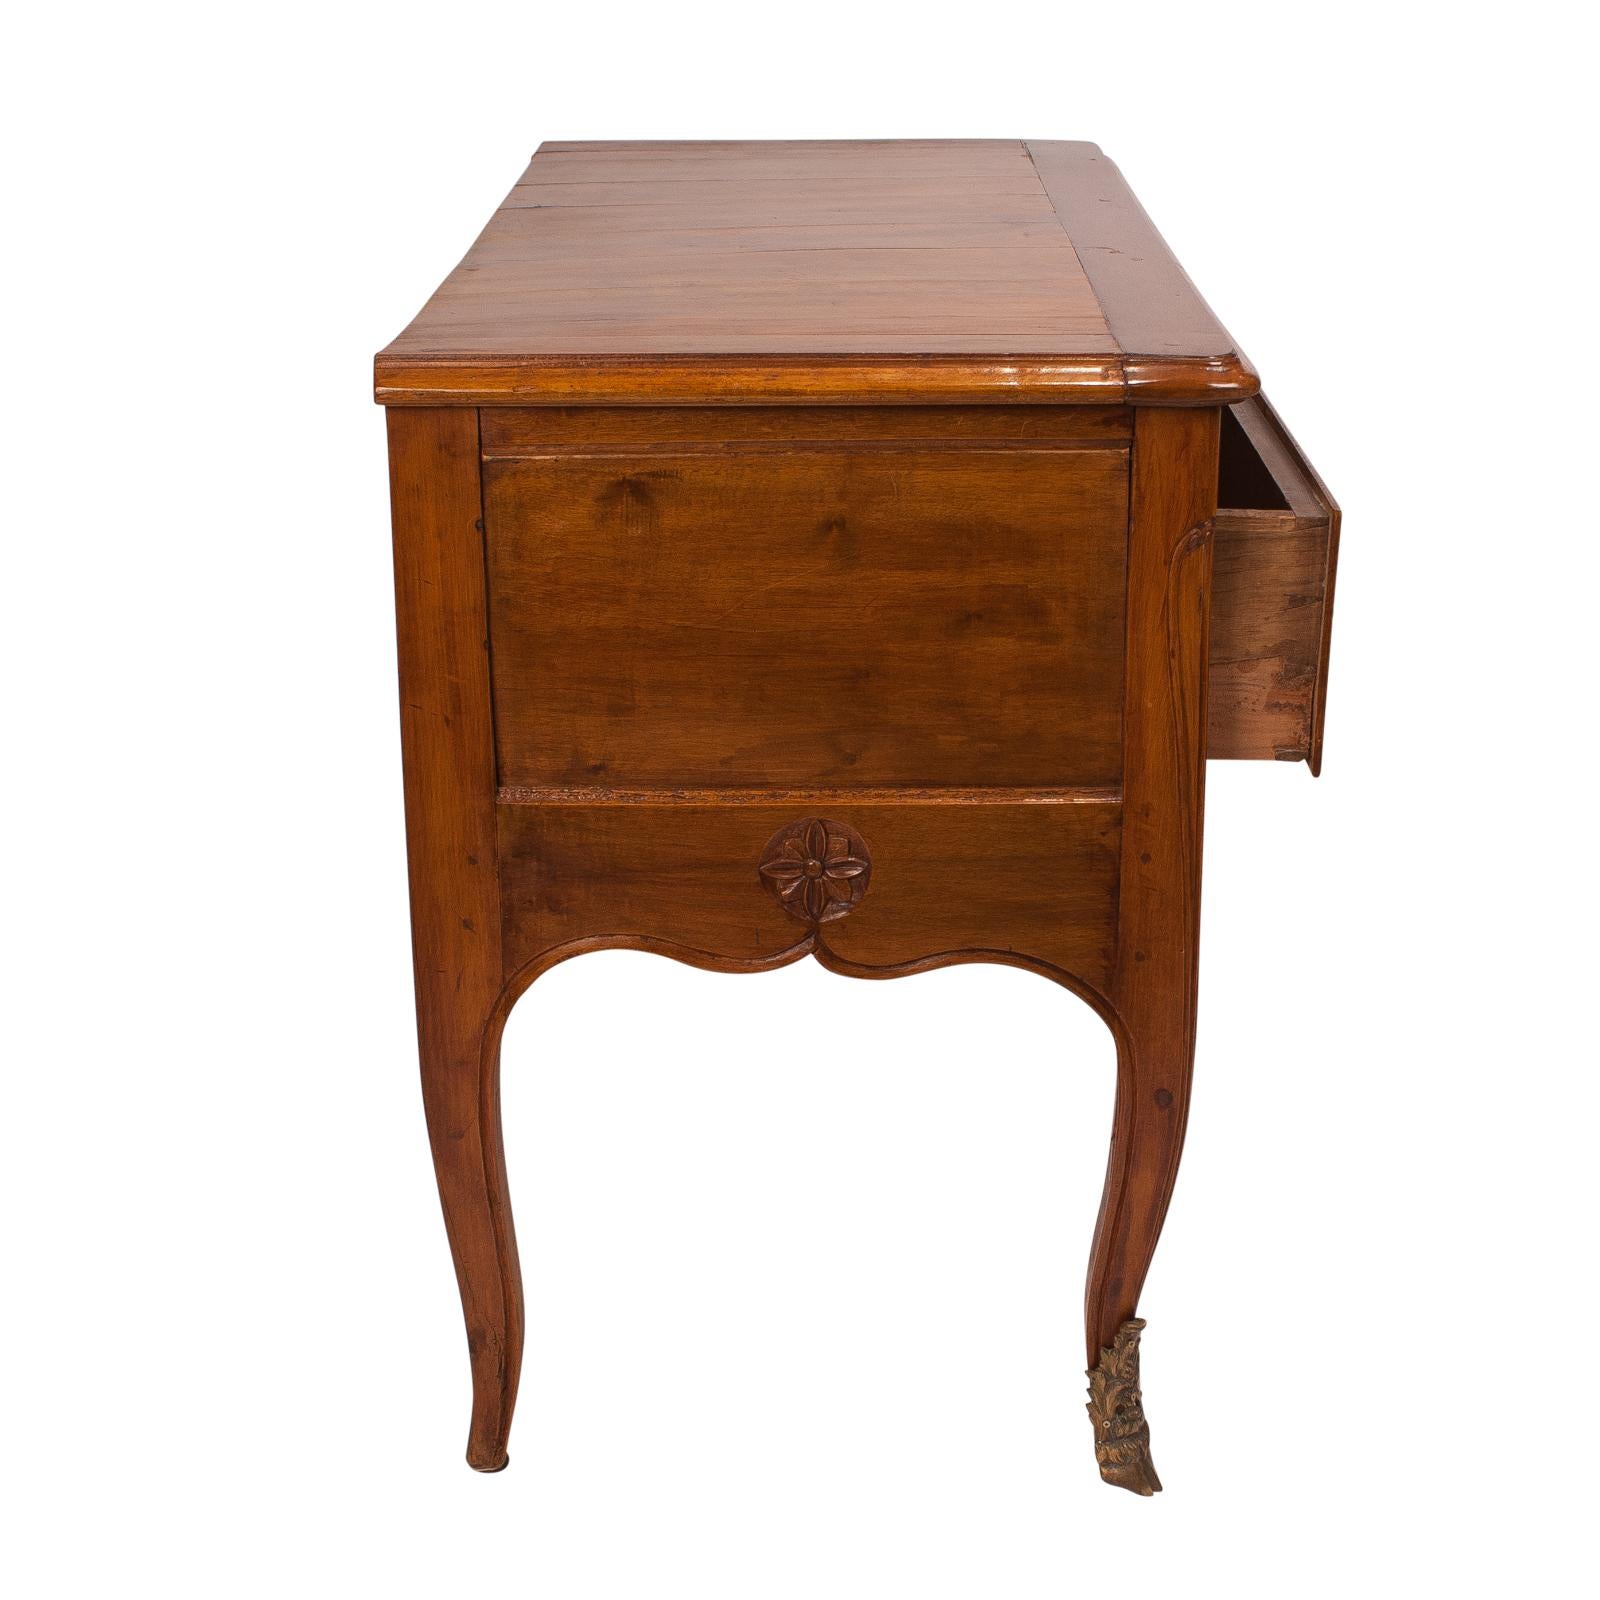 Fruitwood Louis XVI Style One Drawer Table, Italy, 19th Century